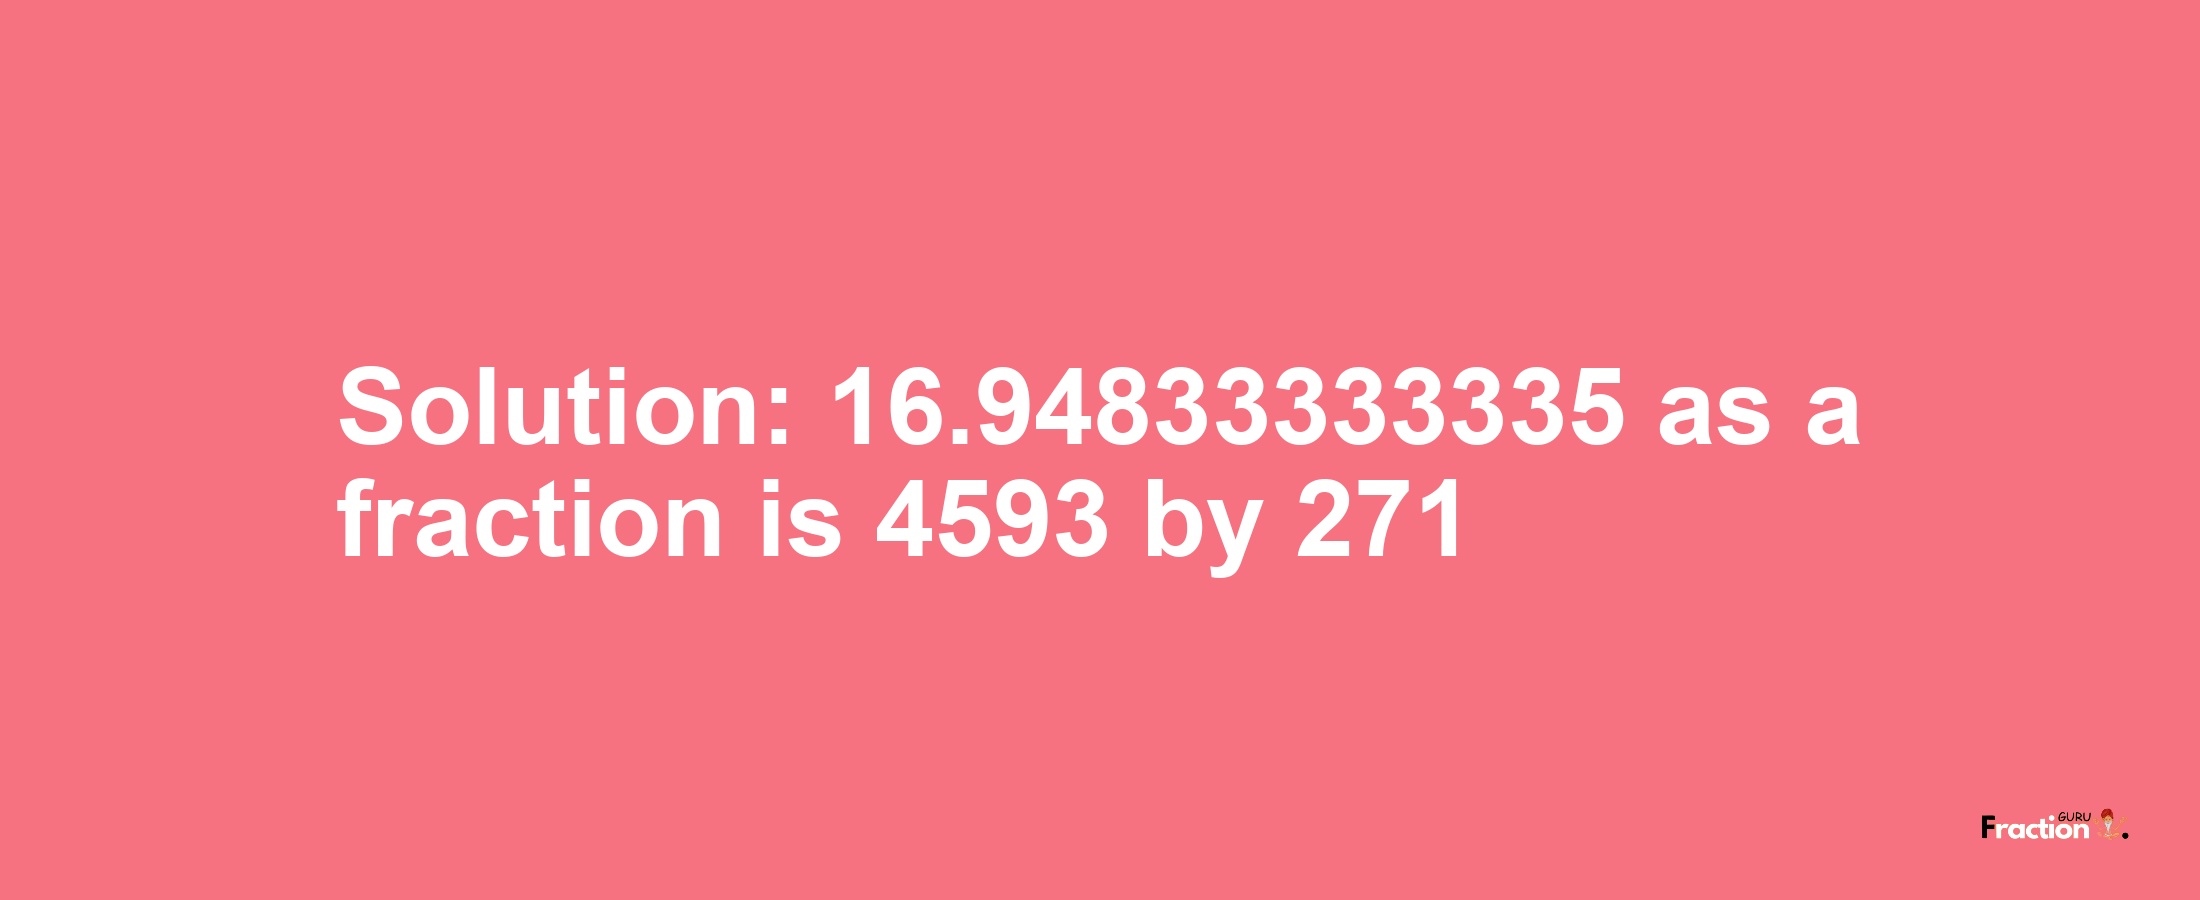 Solution:16.94833333335 as a fraction is 4593/271